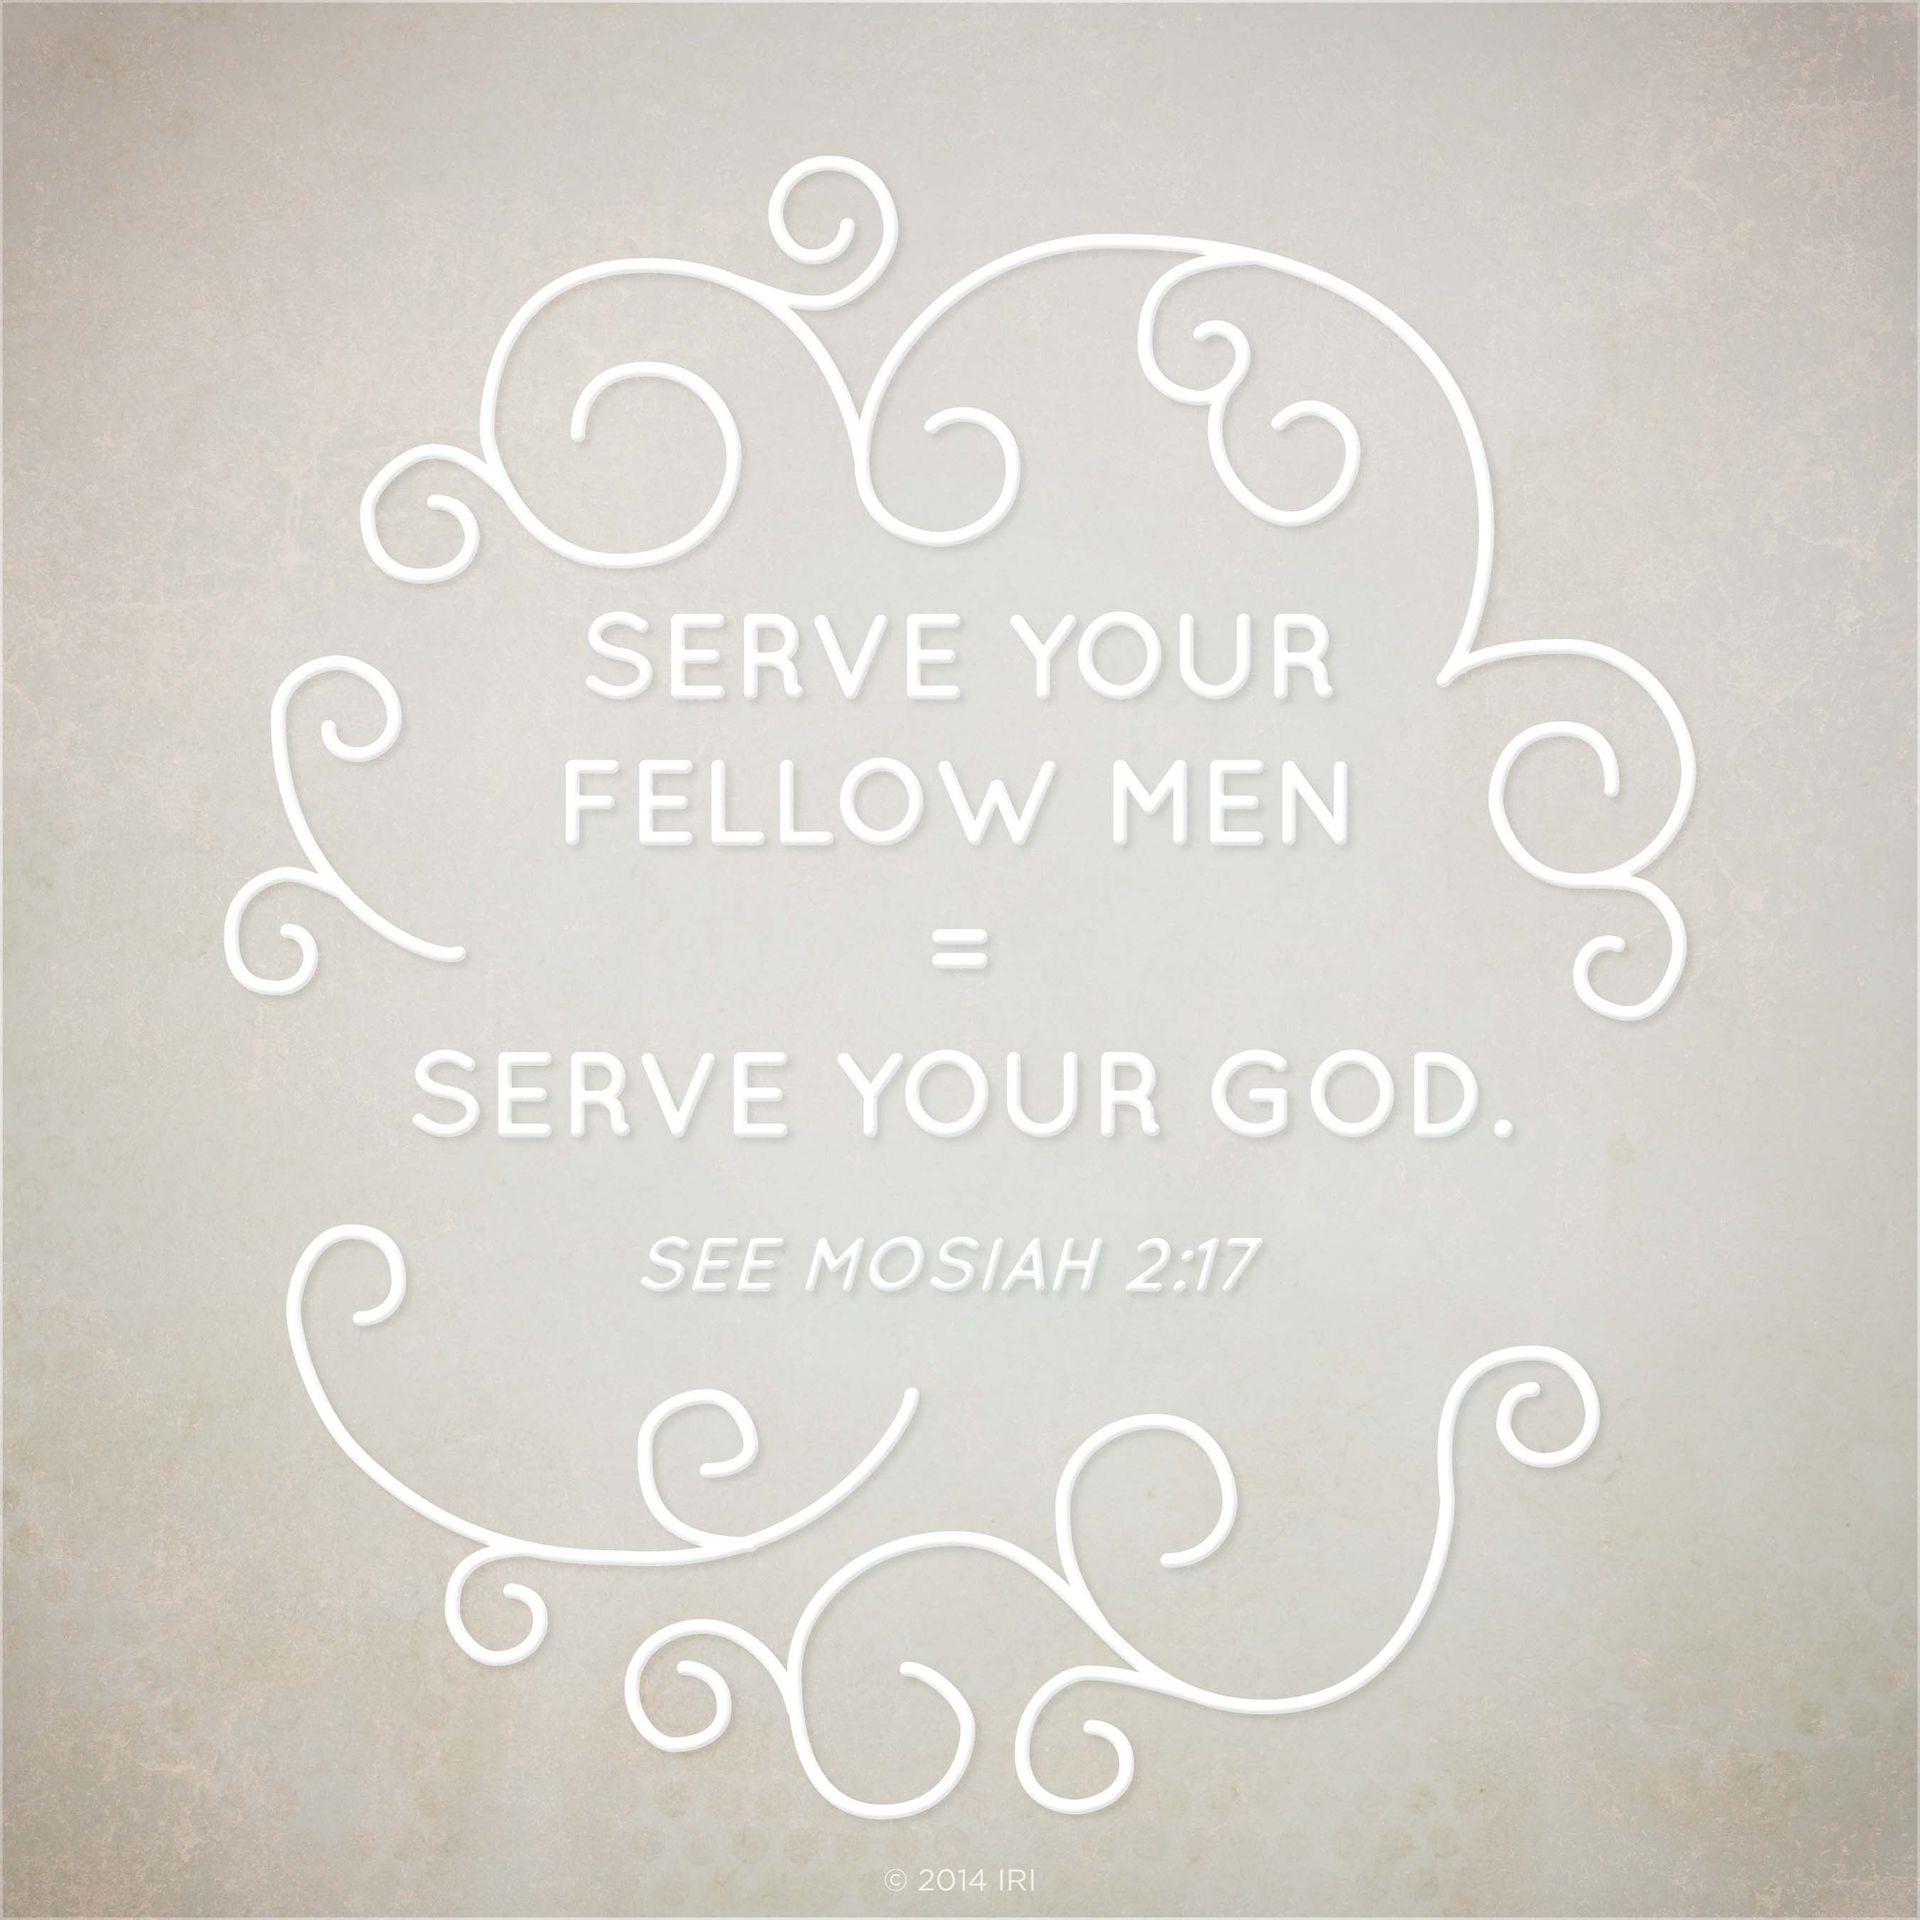 Serving your fellowmen equals serving your God.—See Mosiah 2:17